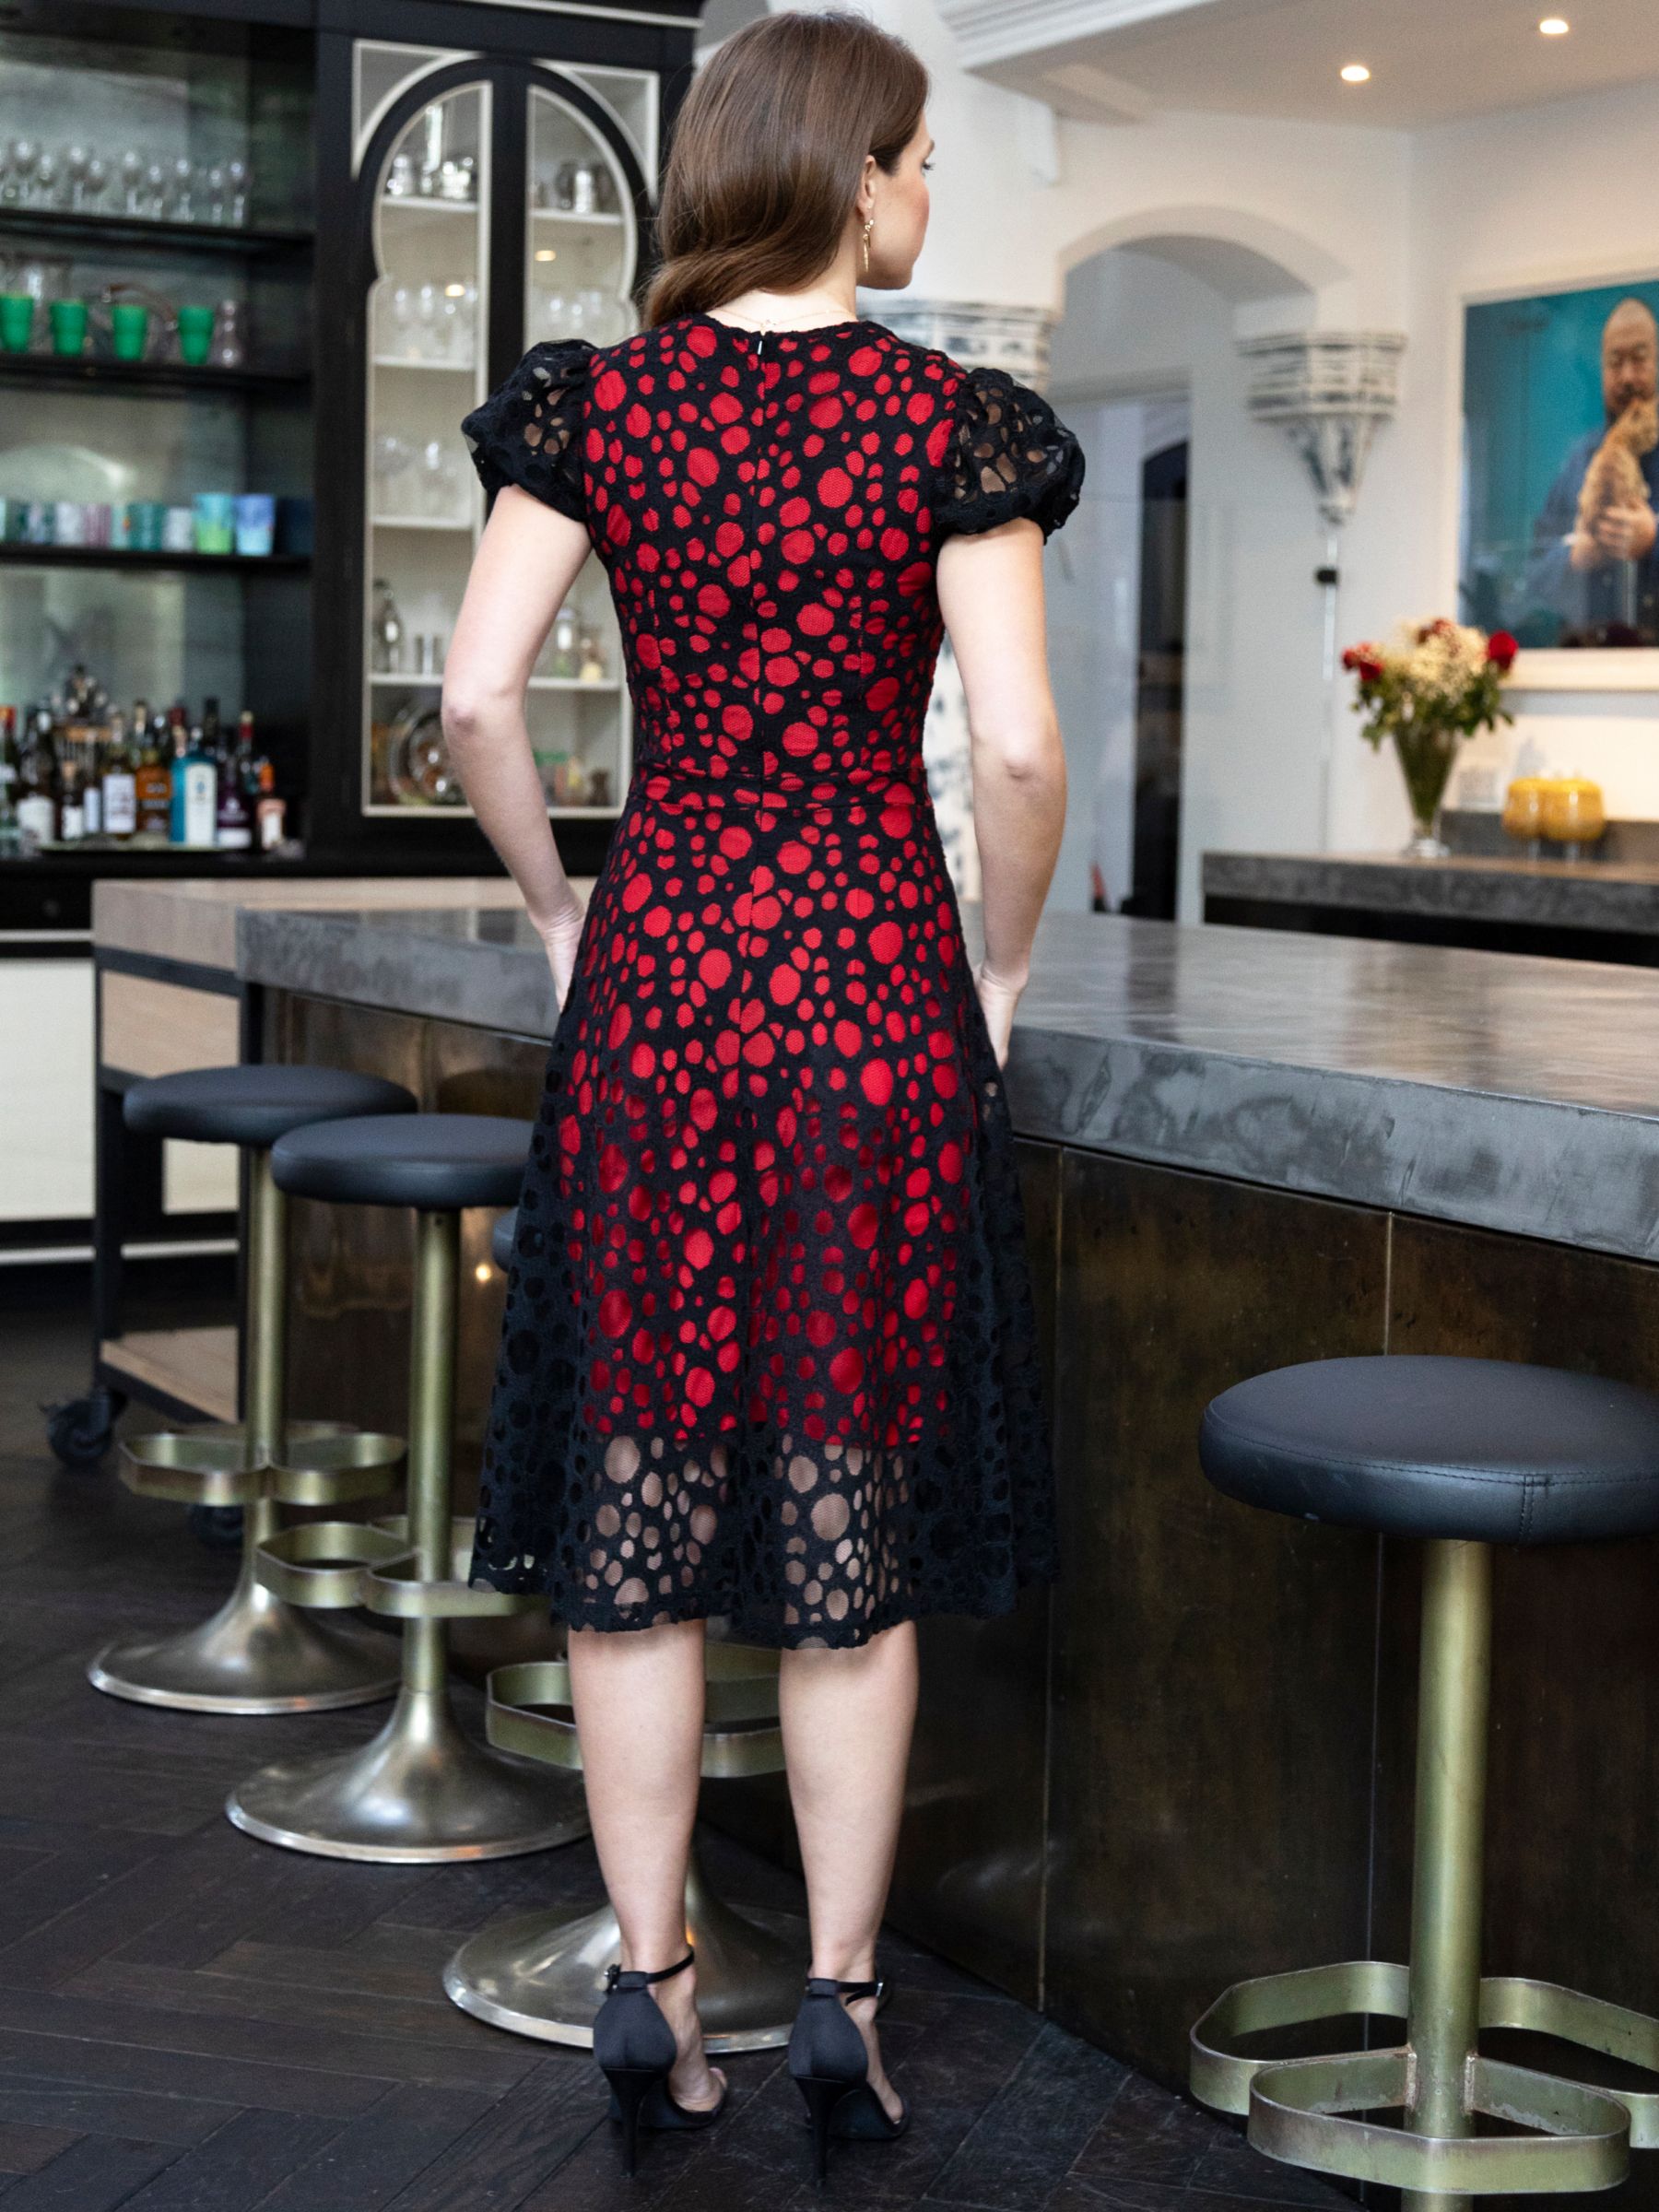 Buy HotSquash A-Line Contrast Lace Dress, Black/Red Online at johnlewis.com